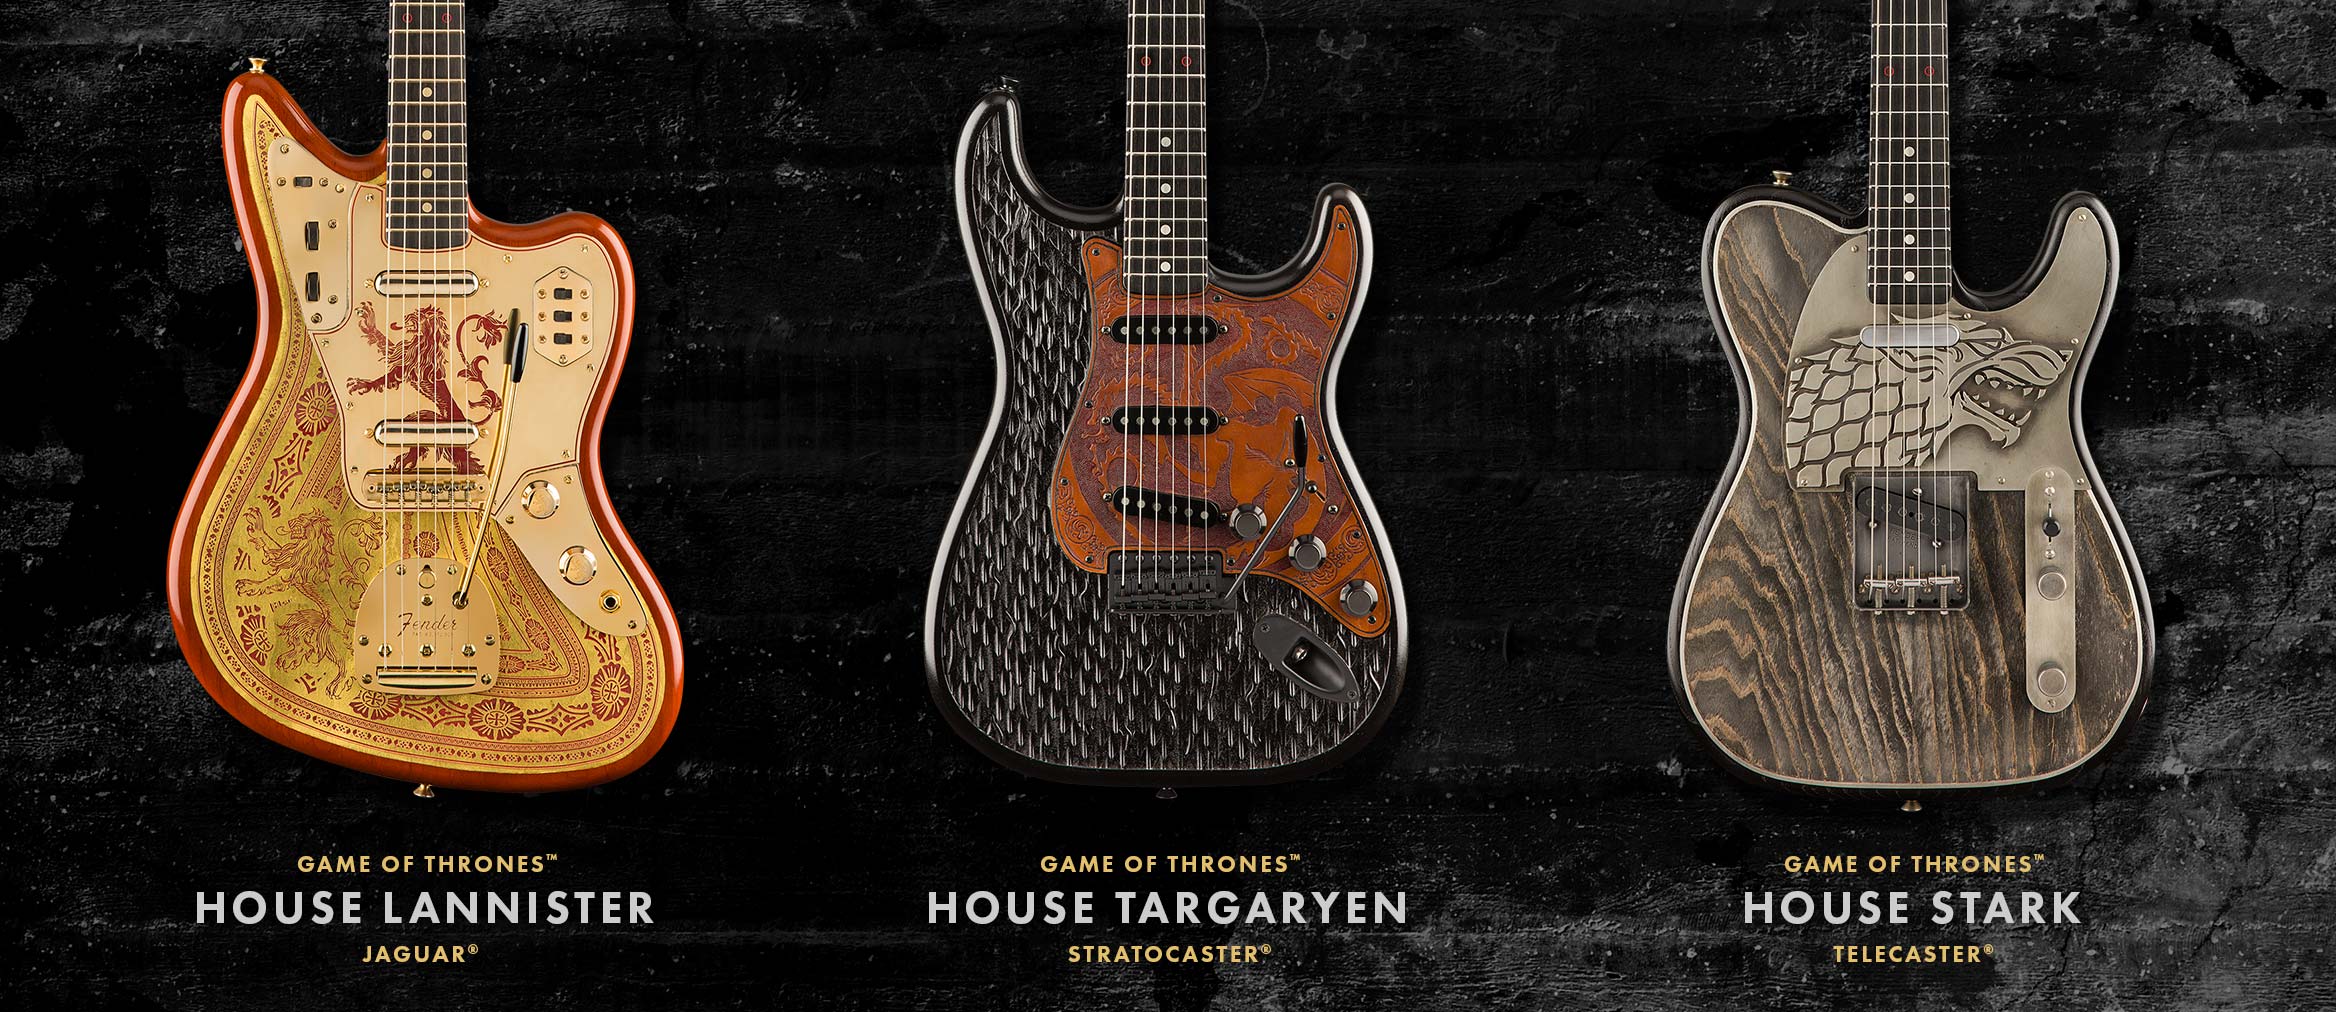 Kills Executable education Fender Reveals Game of Thrones Guitars | WIRED GUITARIST